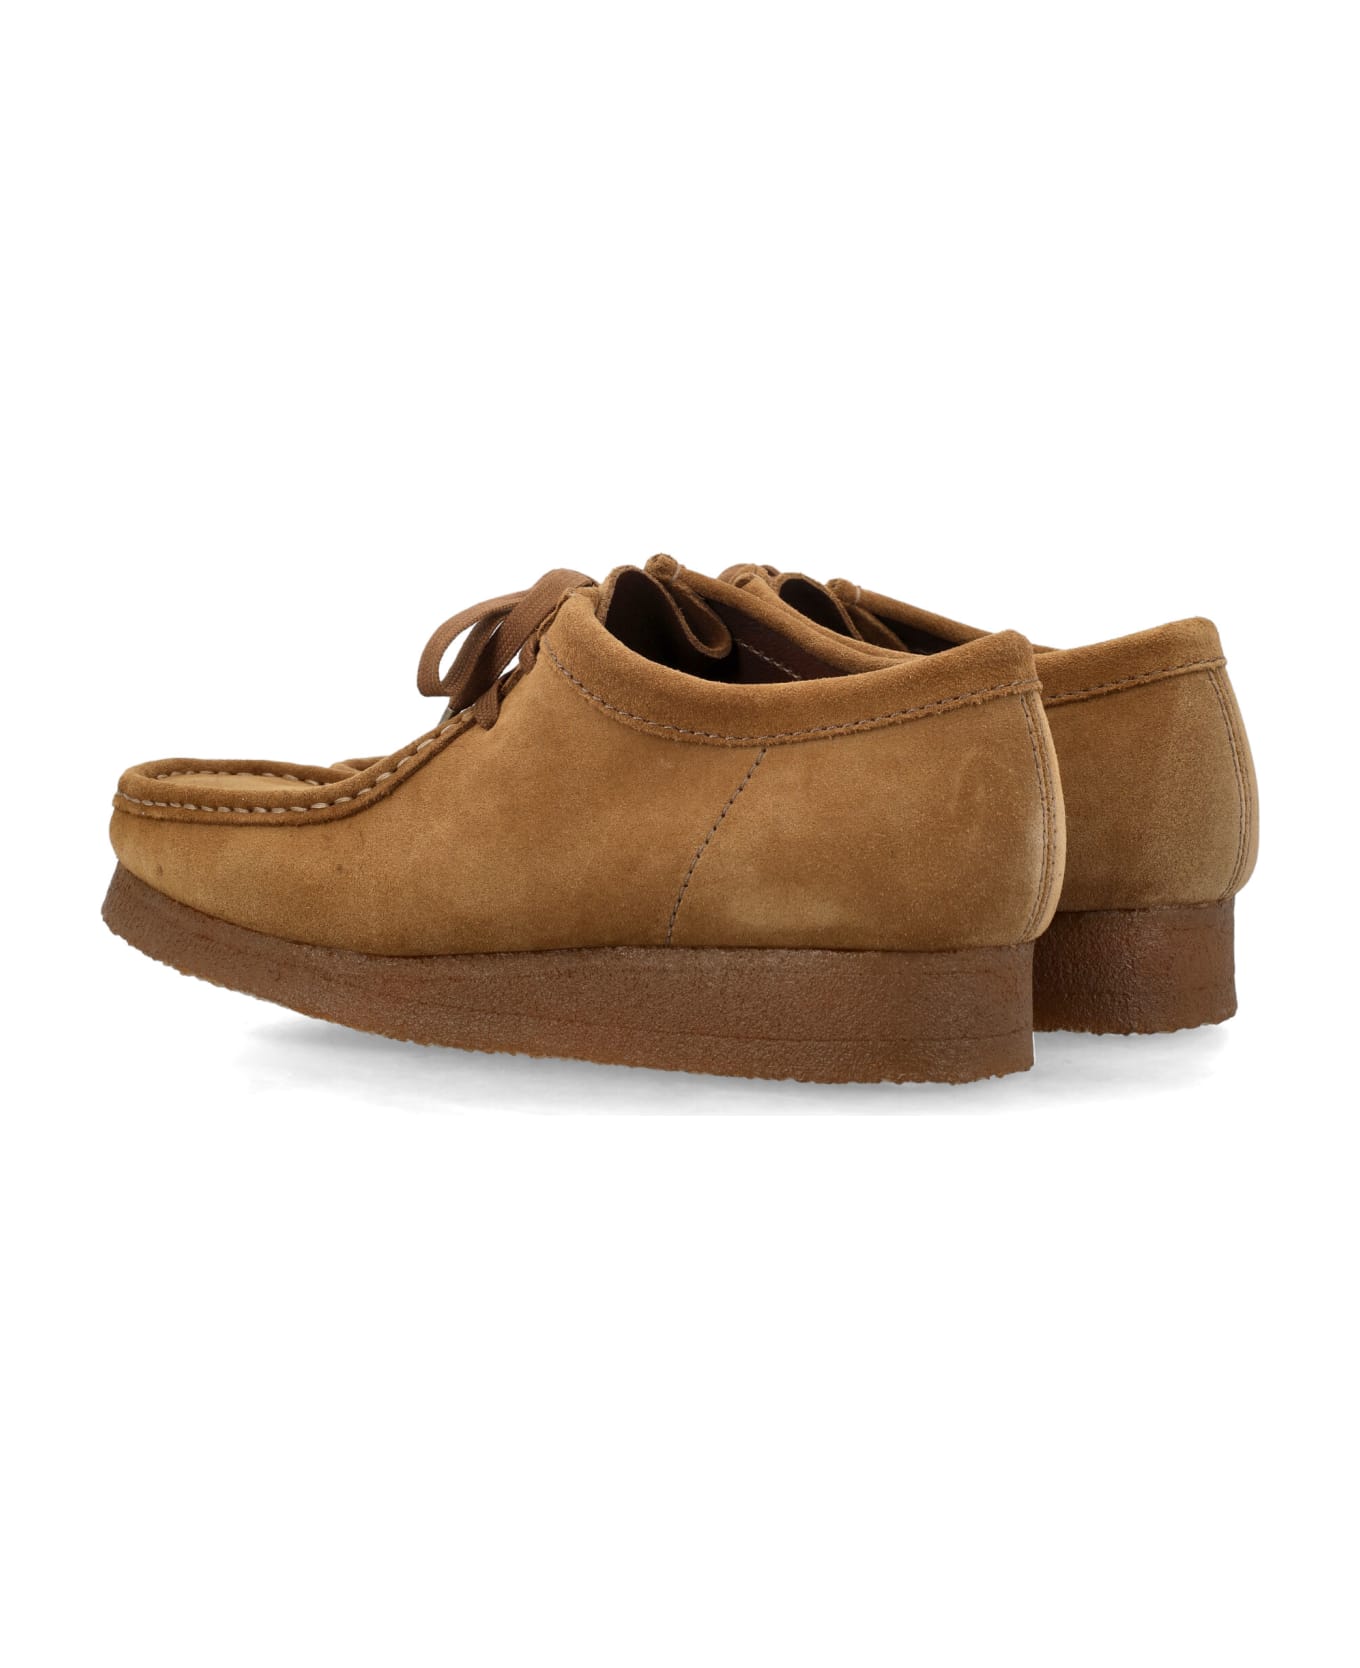 Clarks Wallabee - COLA SUEDE ローファー＆デッキシューズ